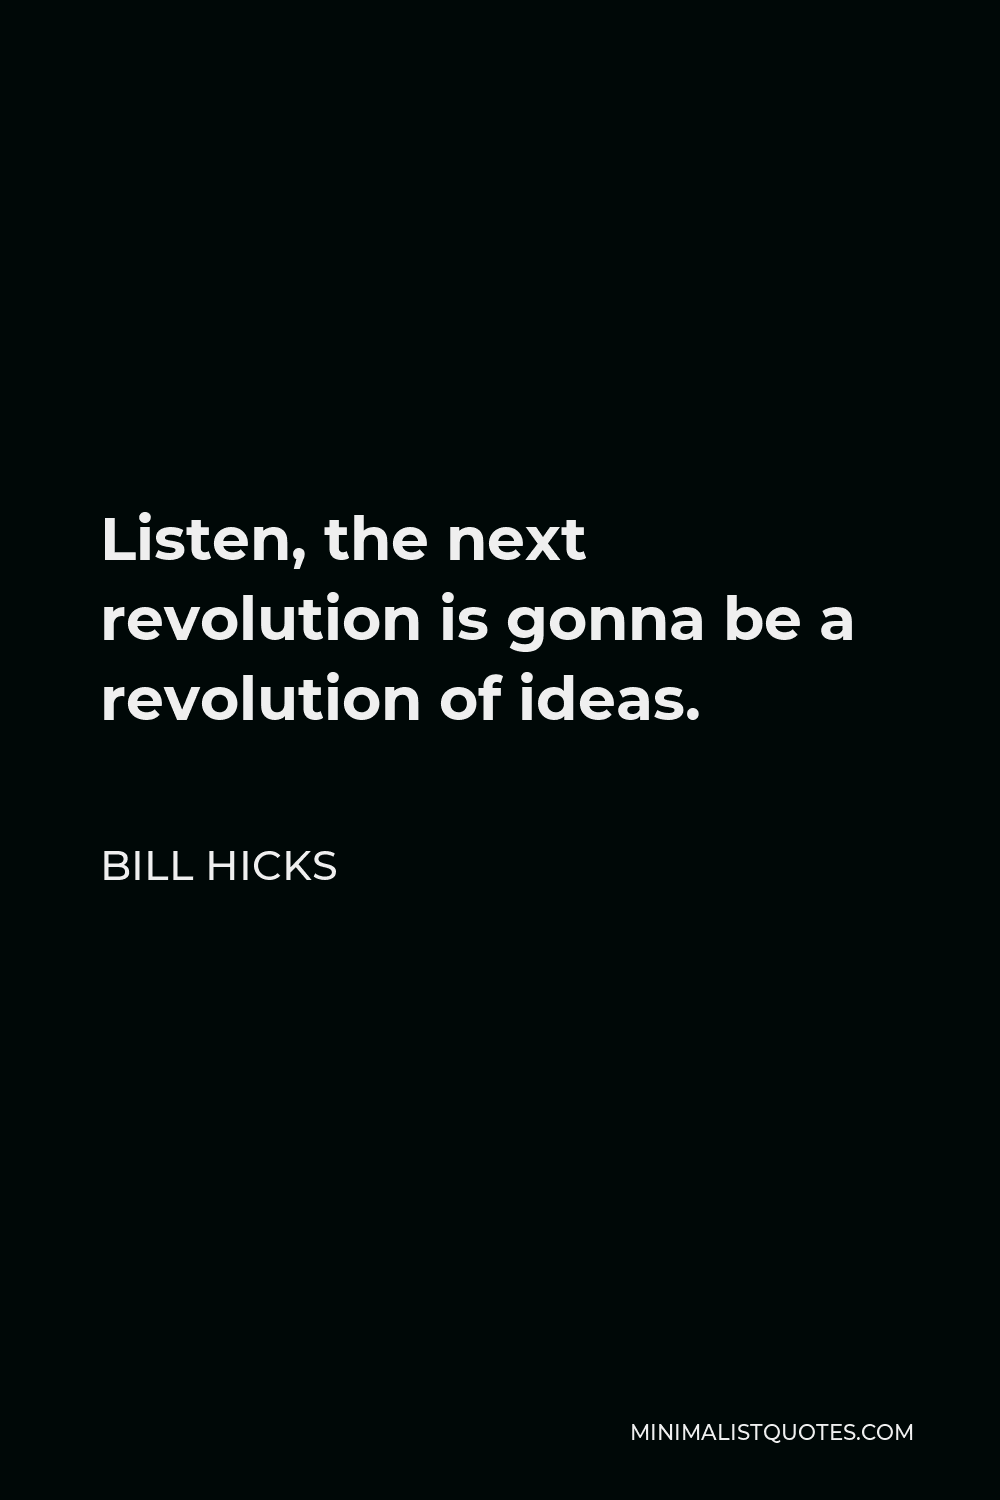 Bill Hicks Quote - Listen, the next revolution is gonna be a revolution of ideas.